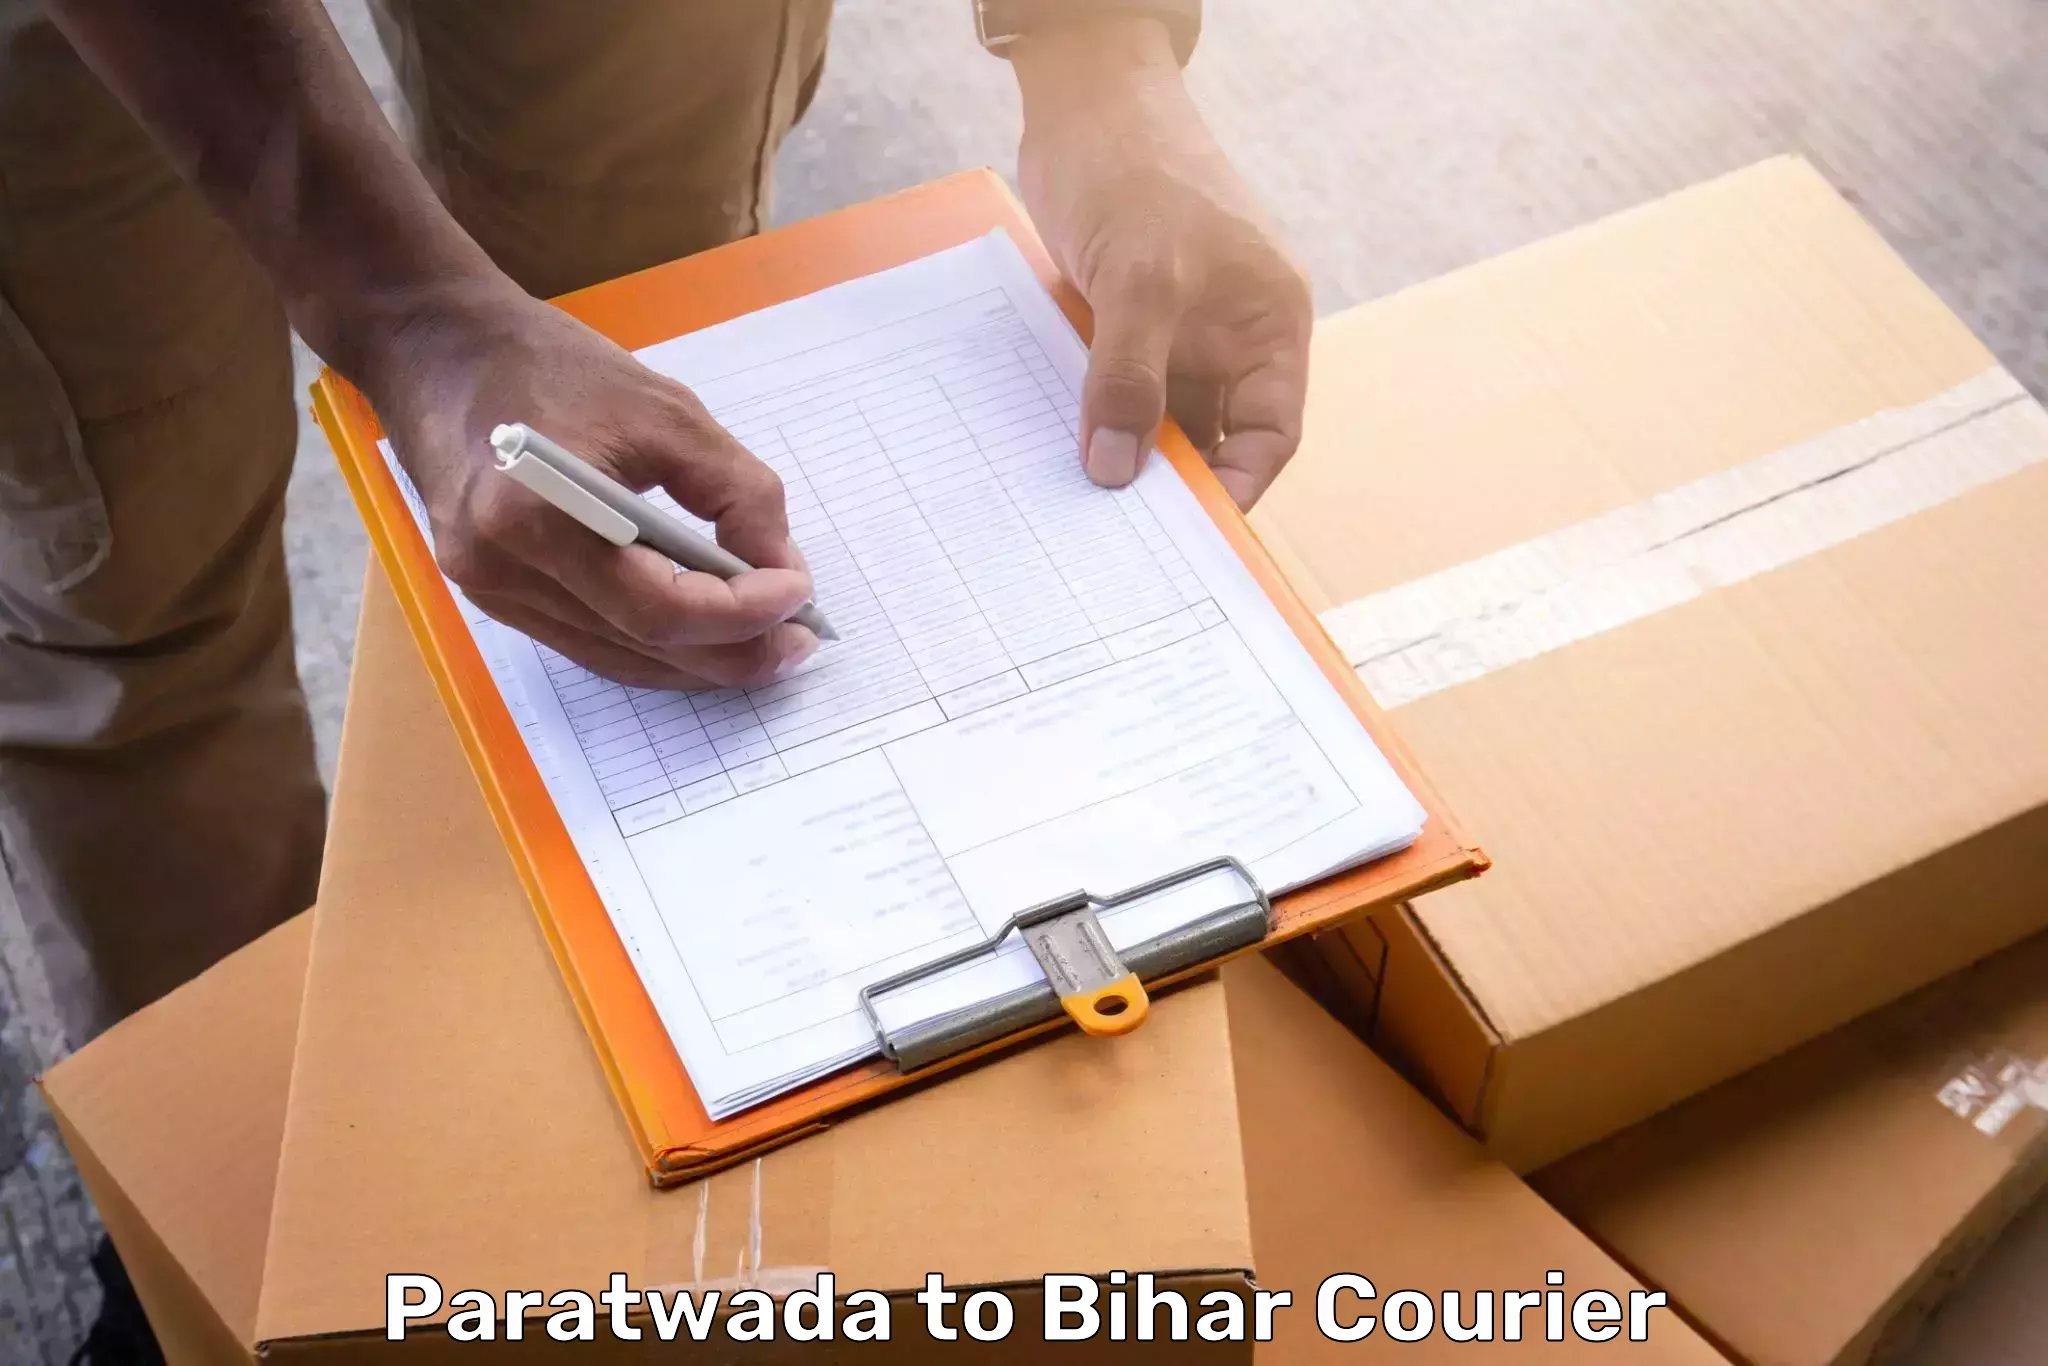 Personal effects shipping in Paratwada to Bagaha